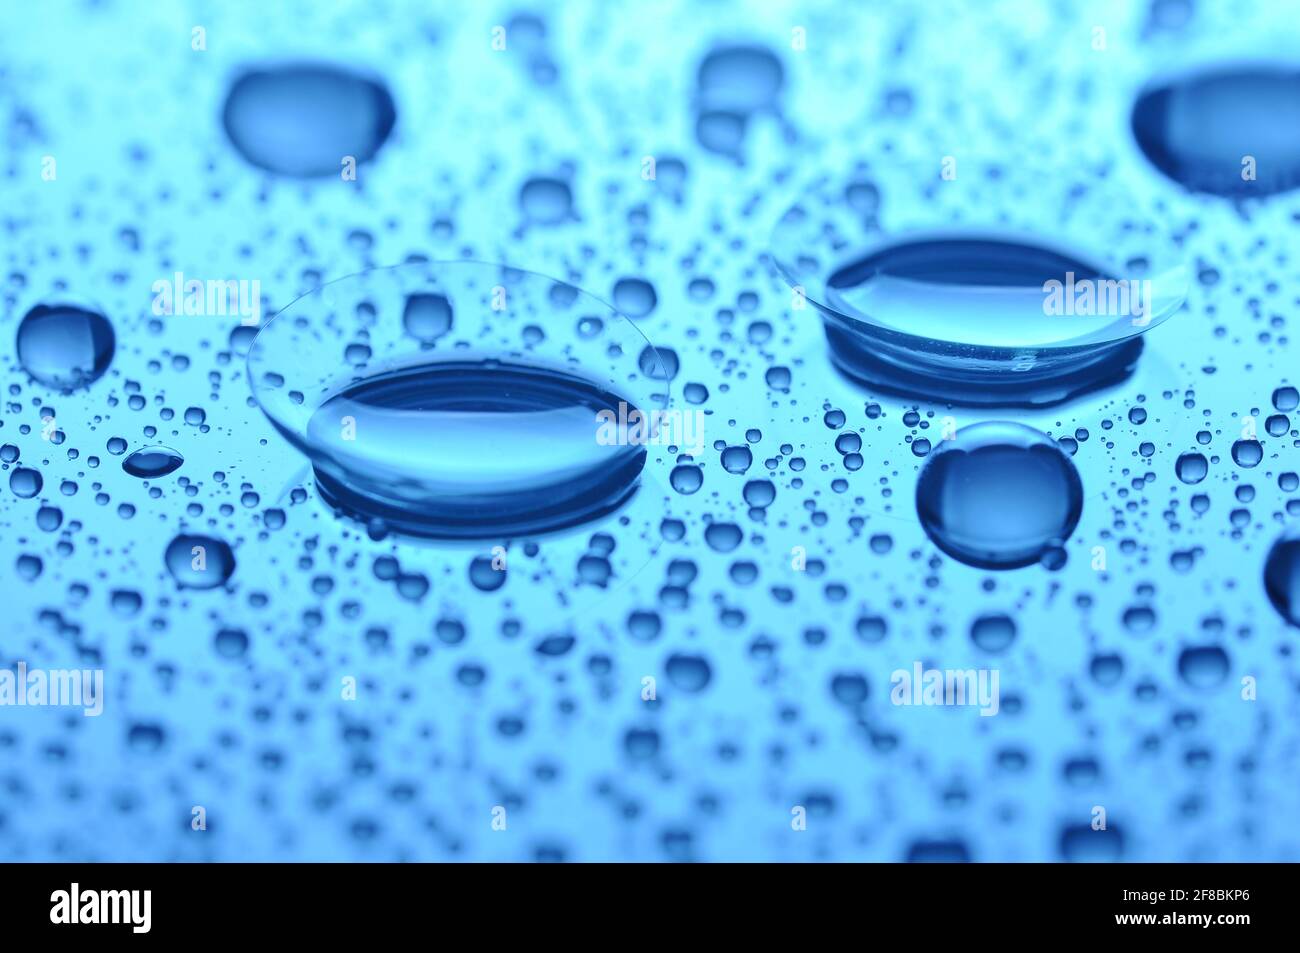 Two contact lenses with drops on light background. Blue toned image. Focus on long-distance lens. Concept sight. Stock Photo